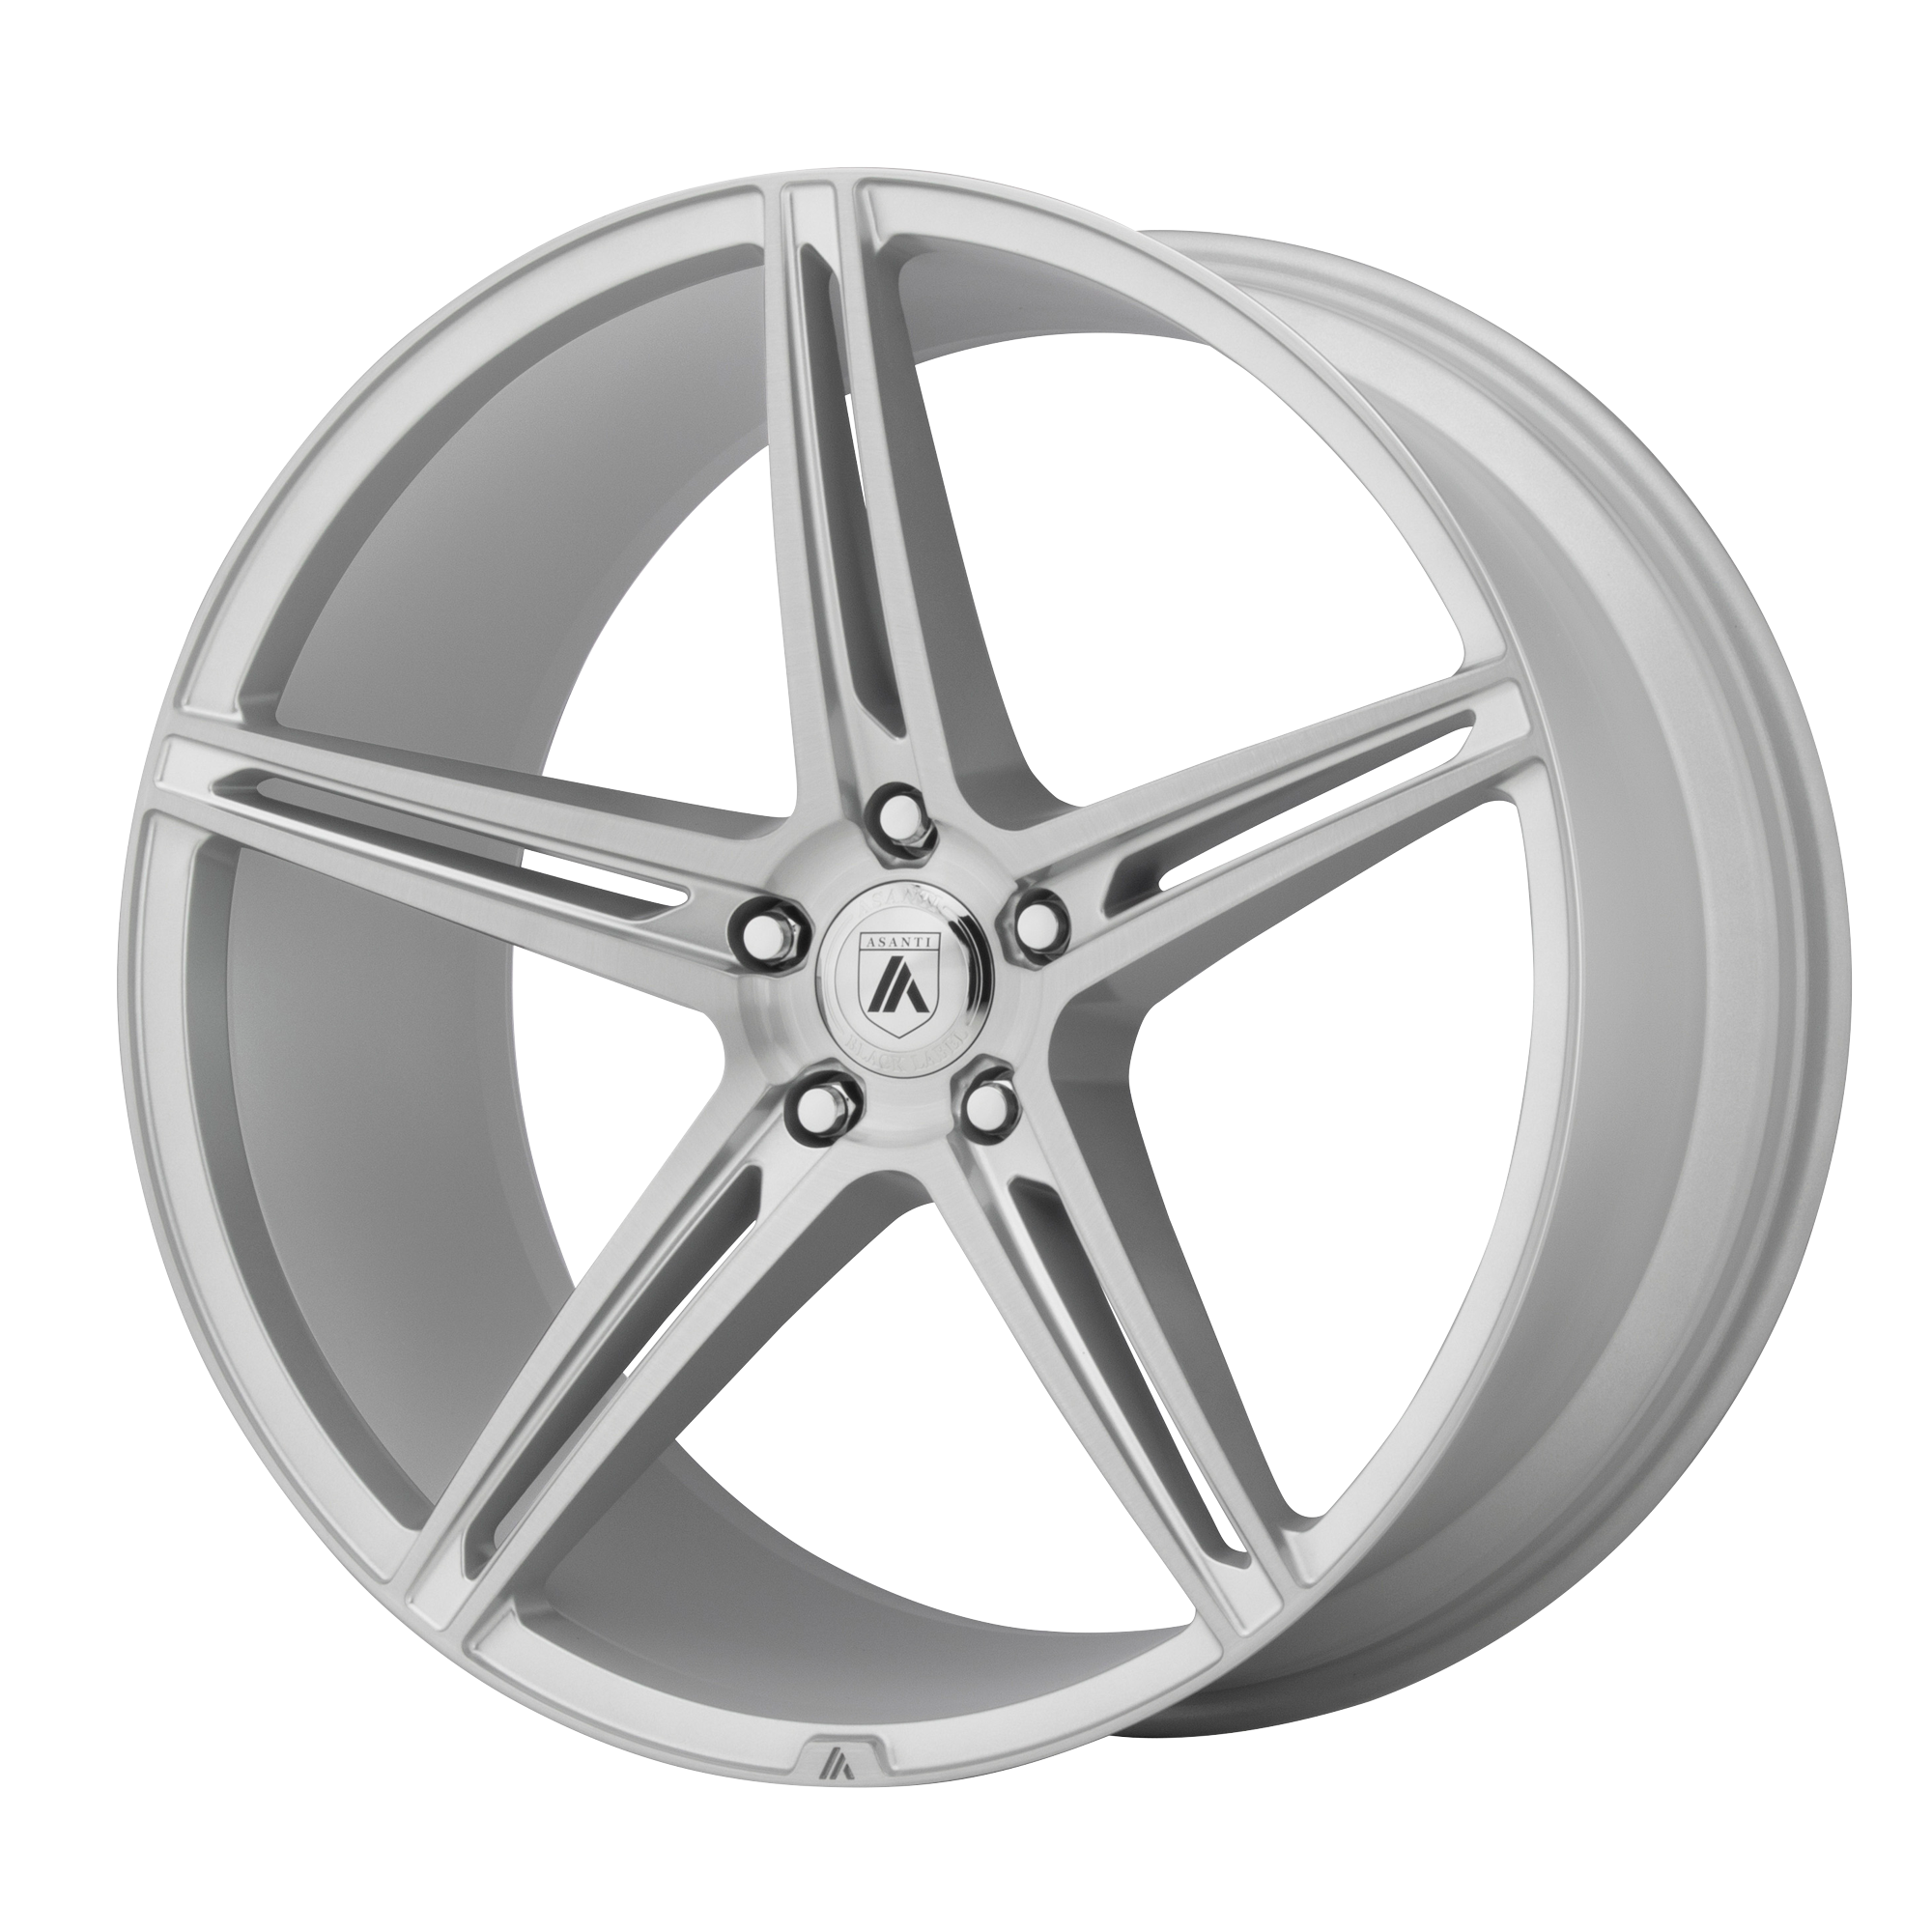 ALPHA 5 20x8.5 5x112.00 BRUSHED SILVER (38 mm) - Tires and Engine Performance